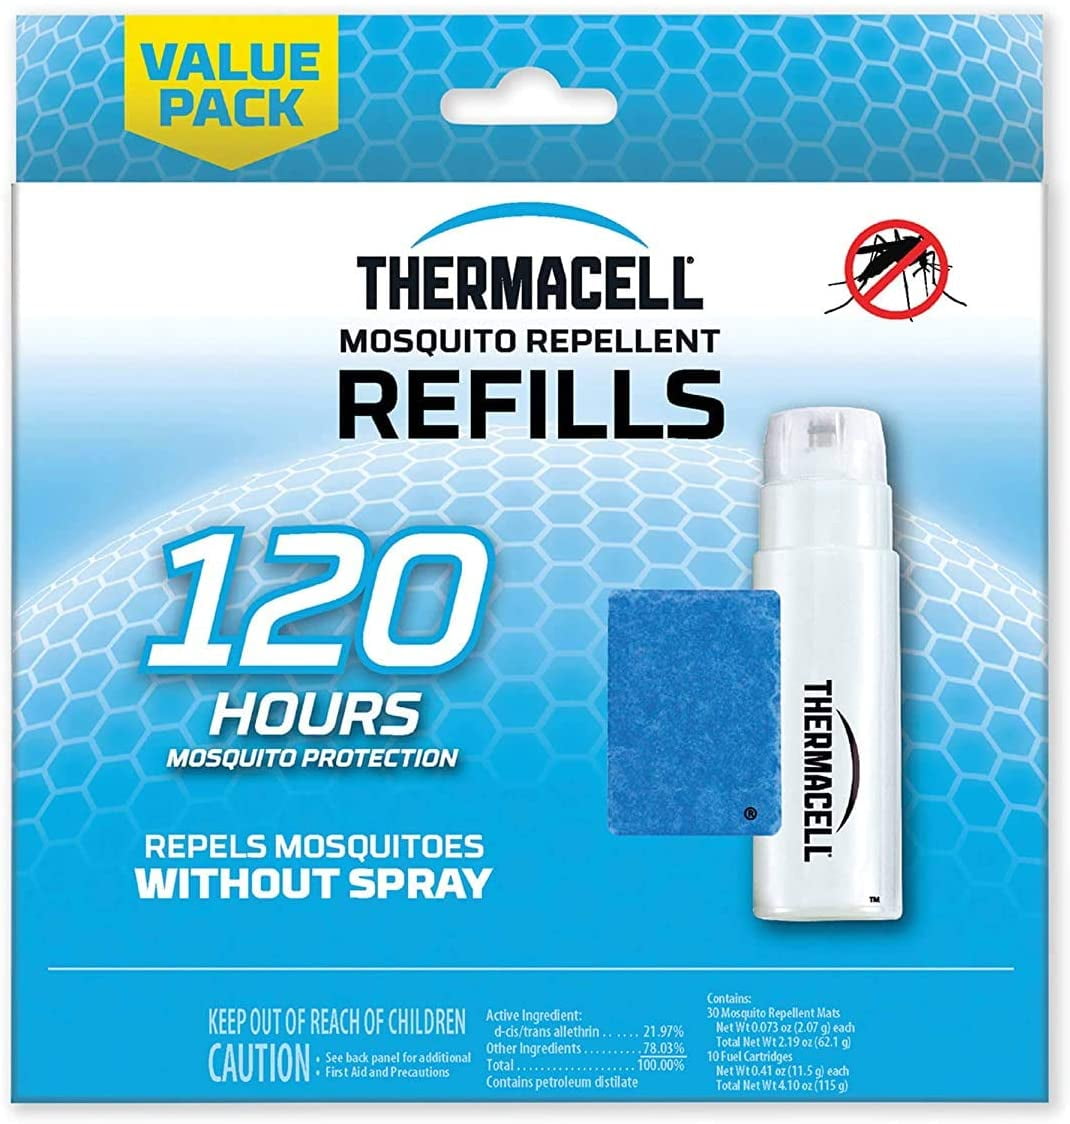 Mosquito Repellent Refills Thermacell Mat 16 Hours Protection 120pc Bug Repeller 